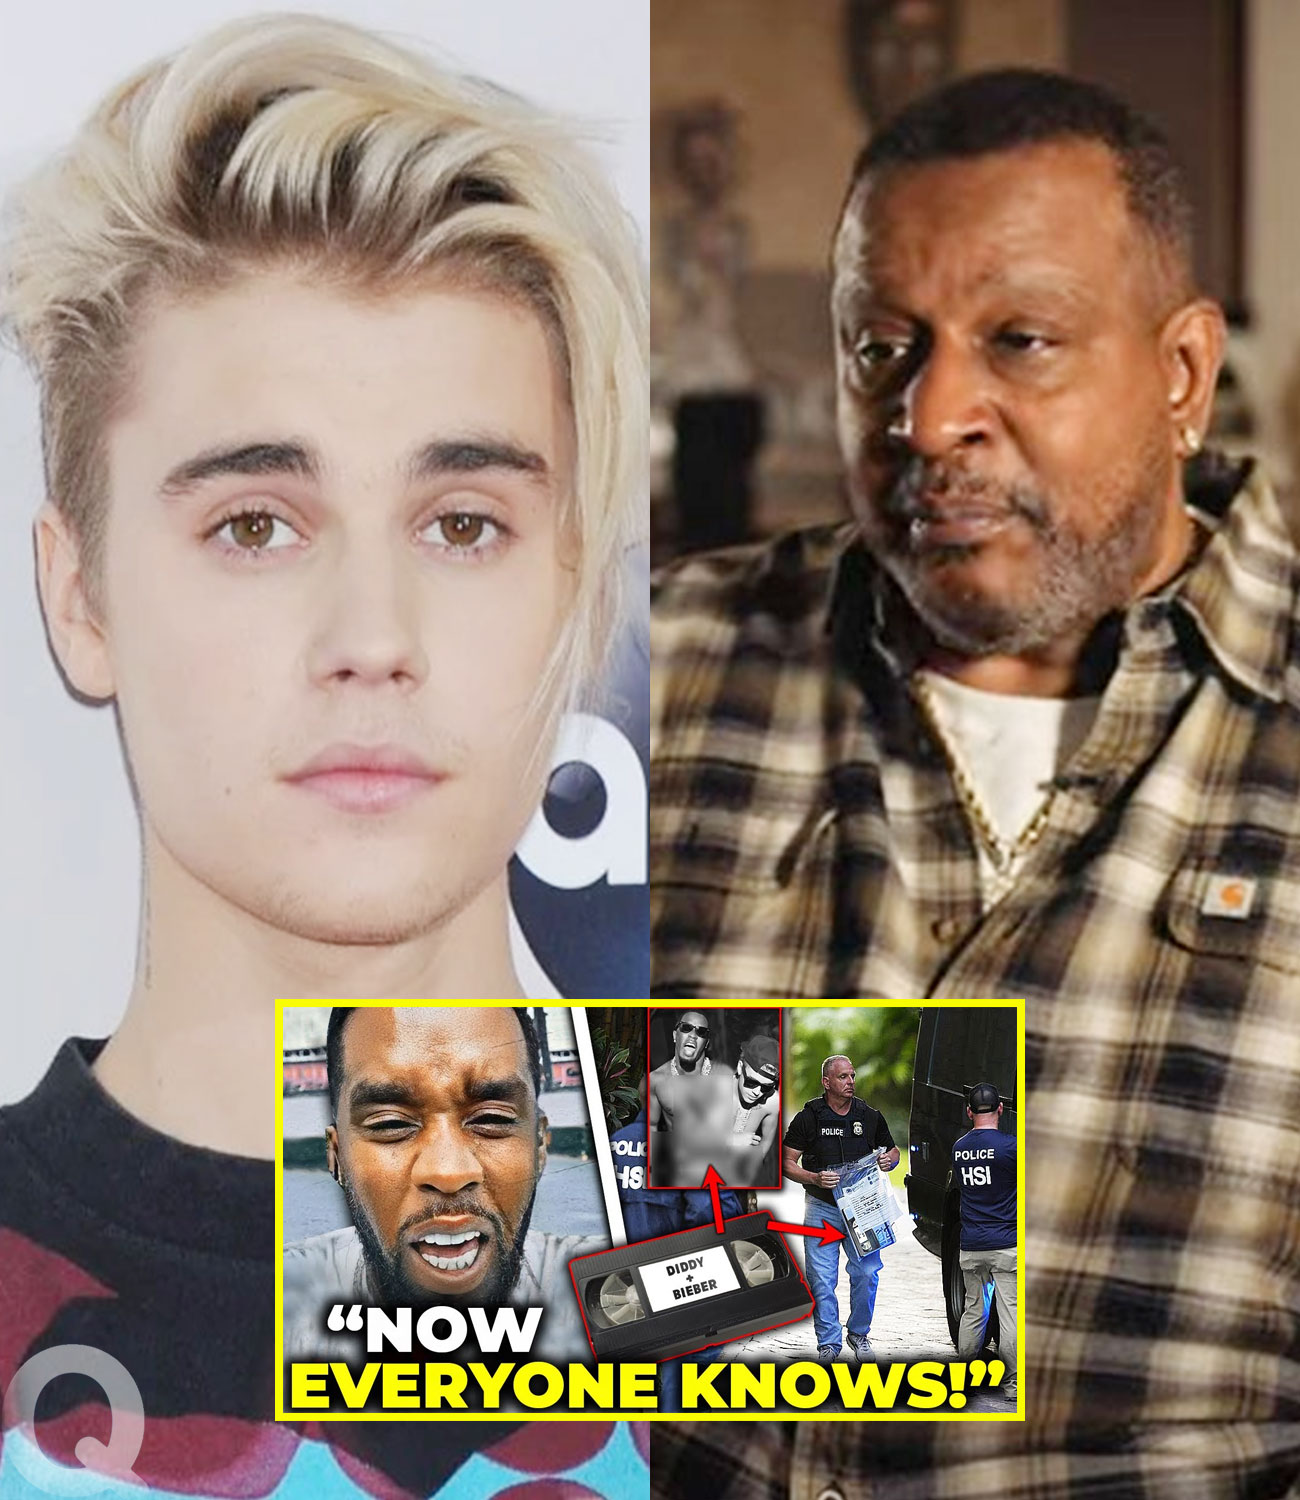 Justin Bieber EXPOSES What P Diddy’s Bodyguard Did To Him